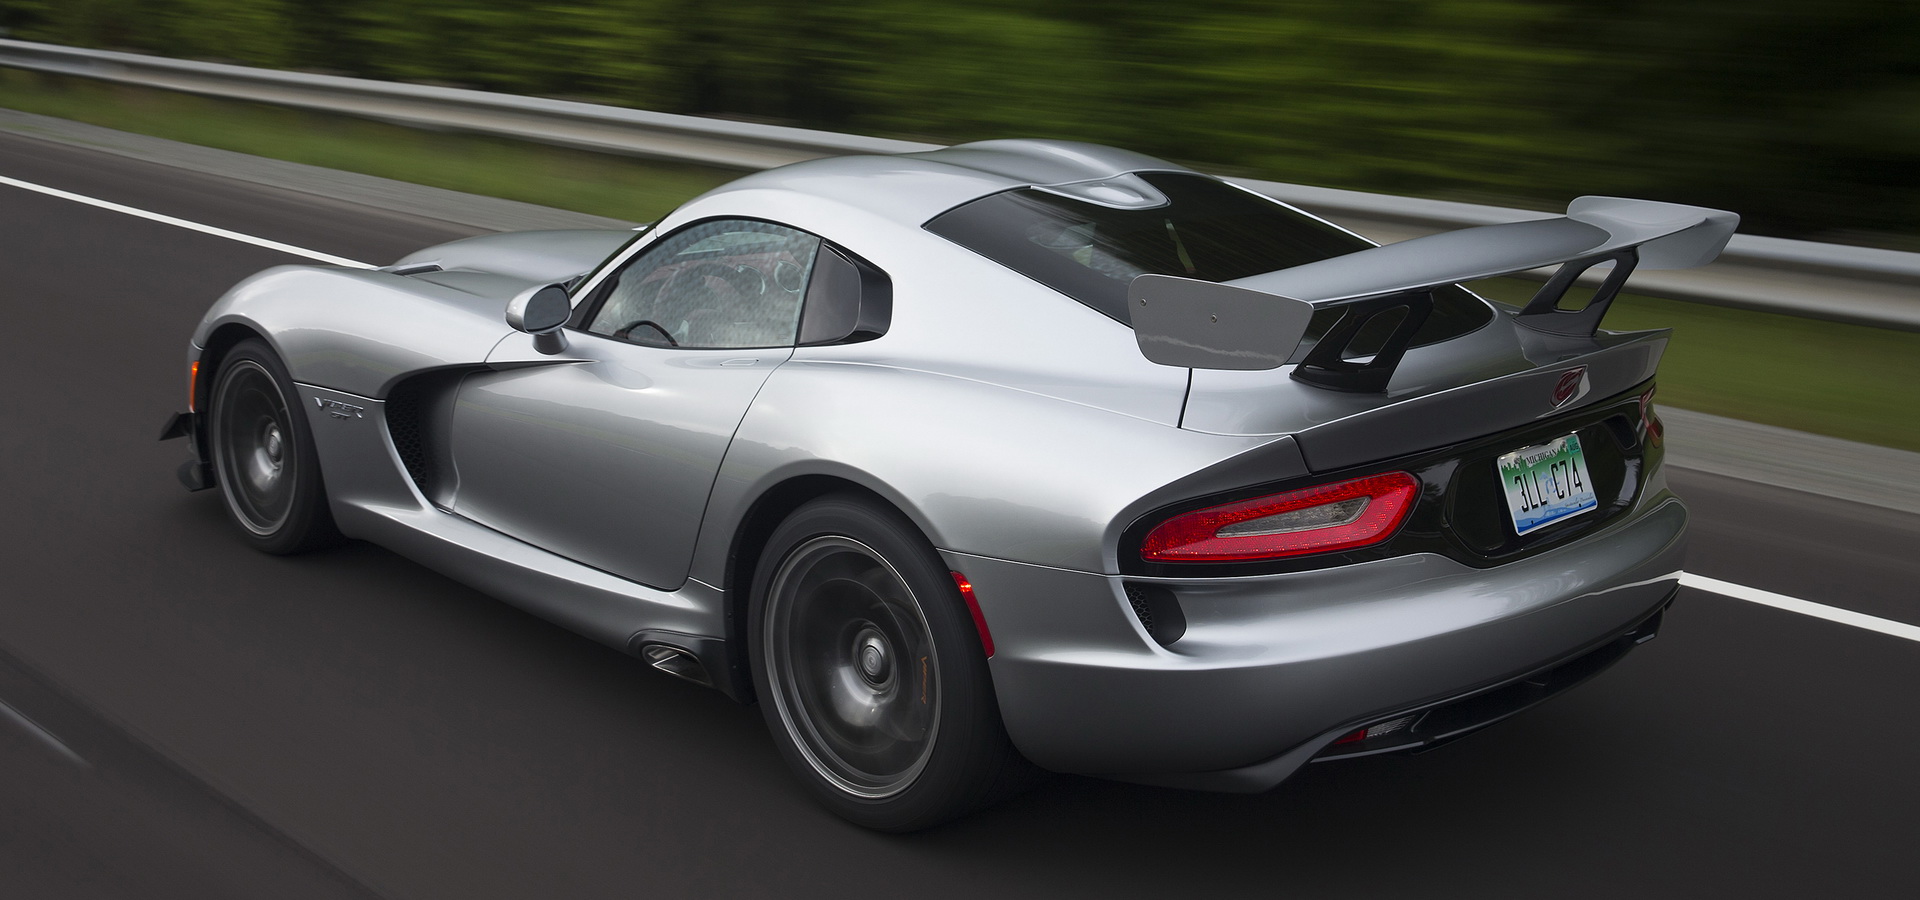 Five Brand New Dodge Vipers Were Sold Last Year In The U S And One In Canada Carscoops